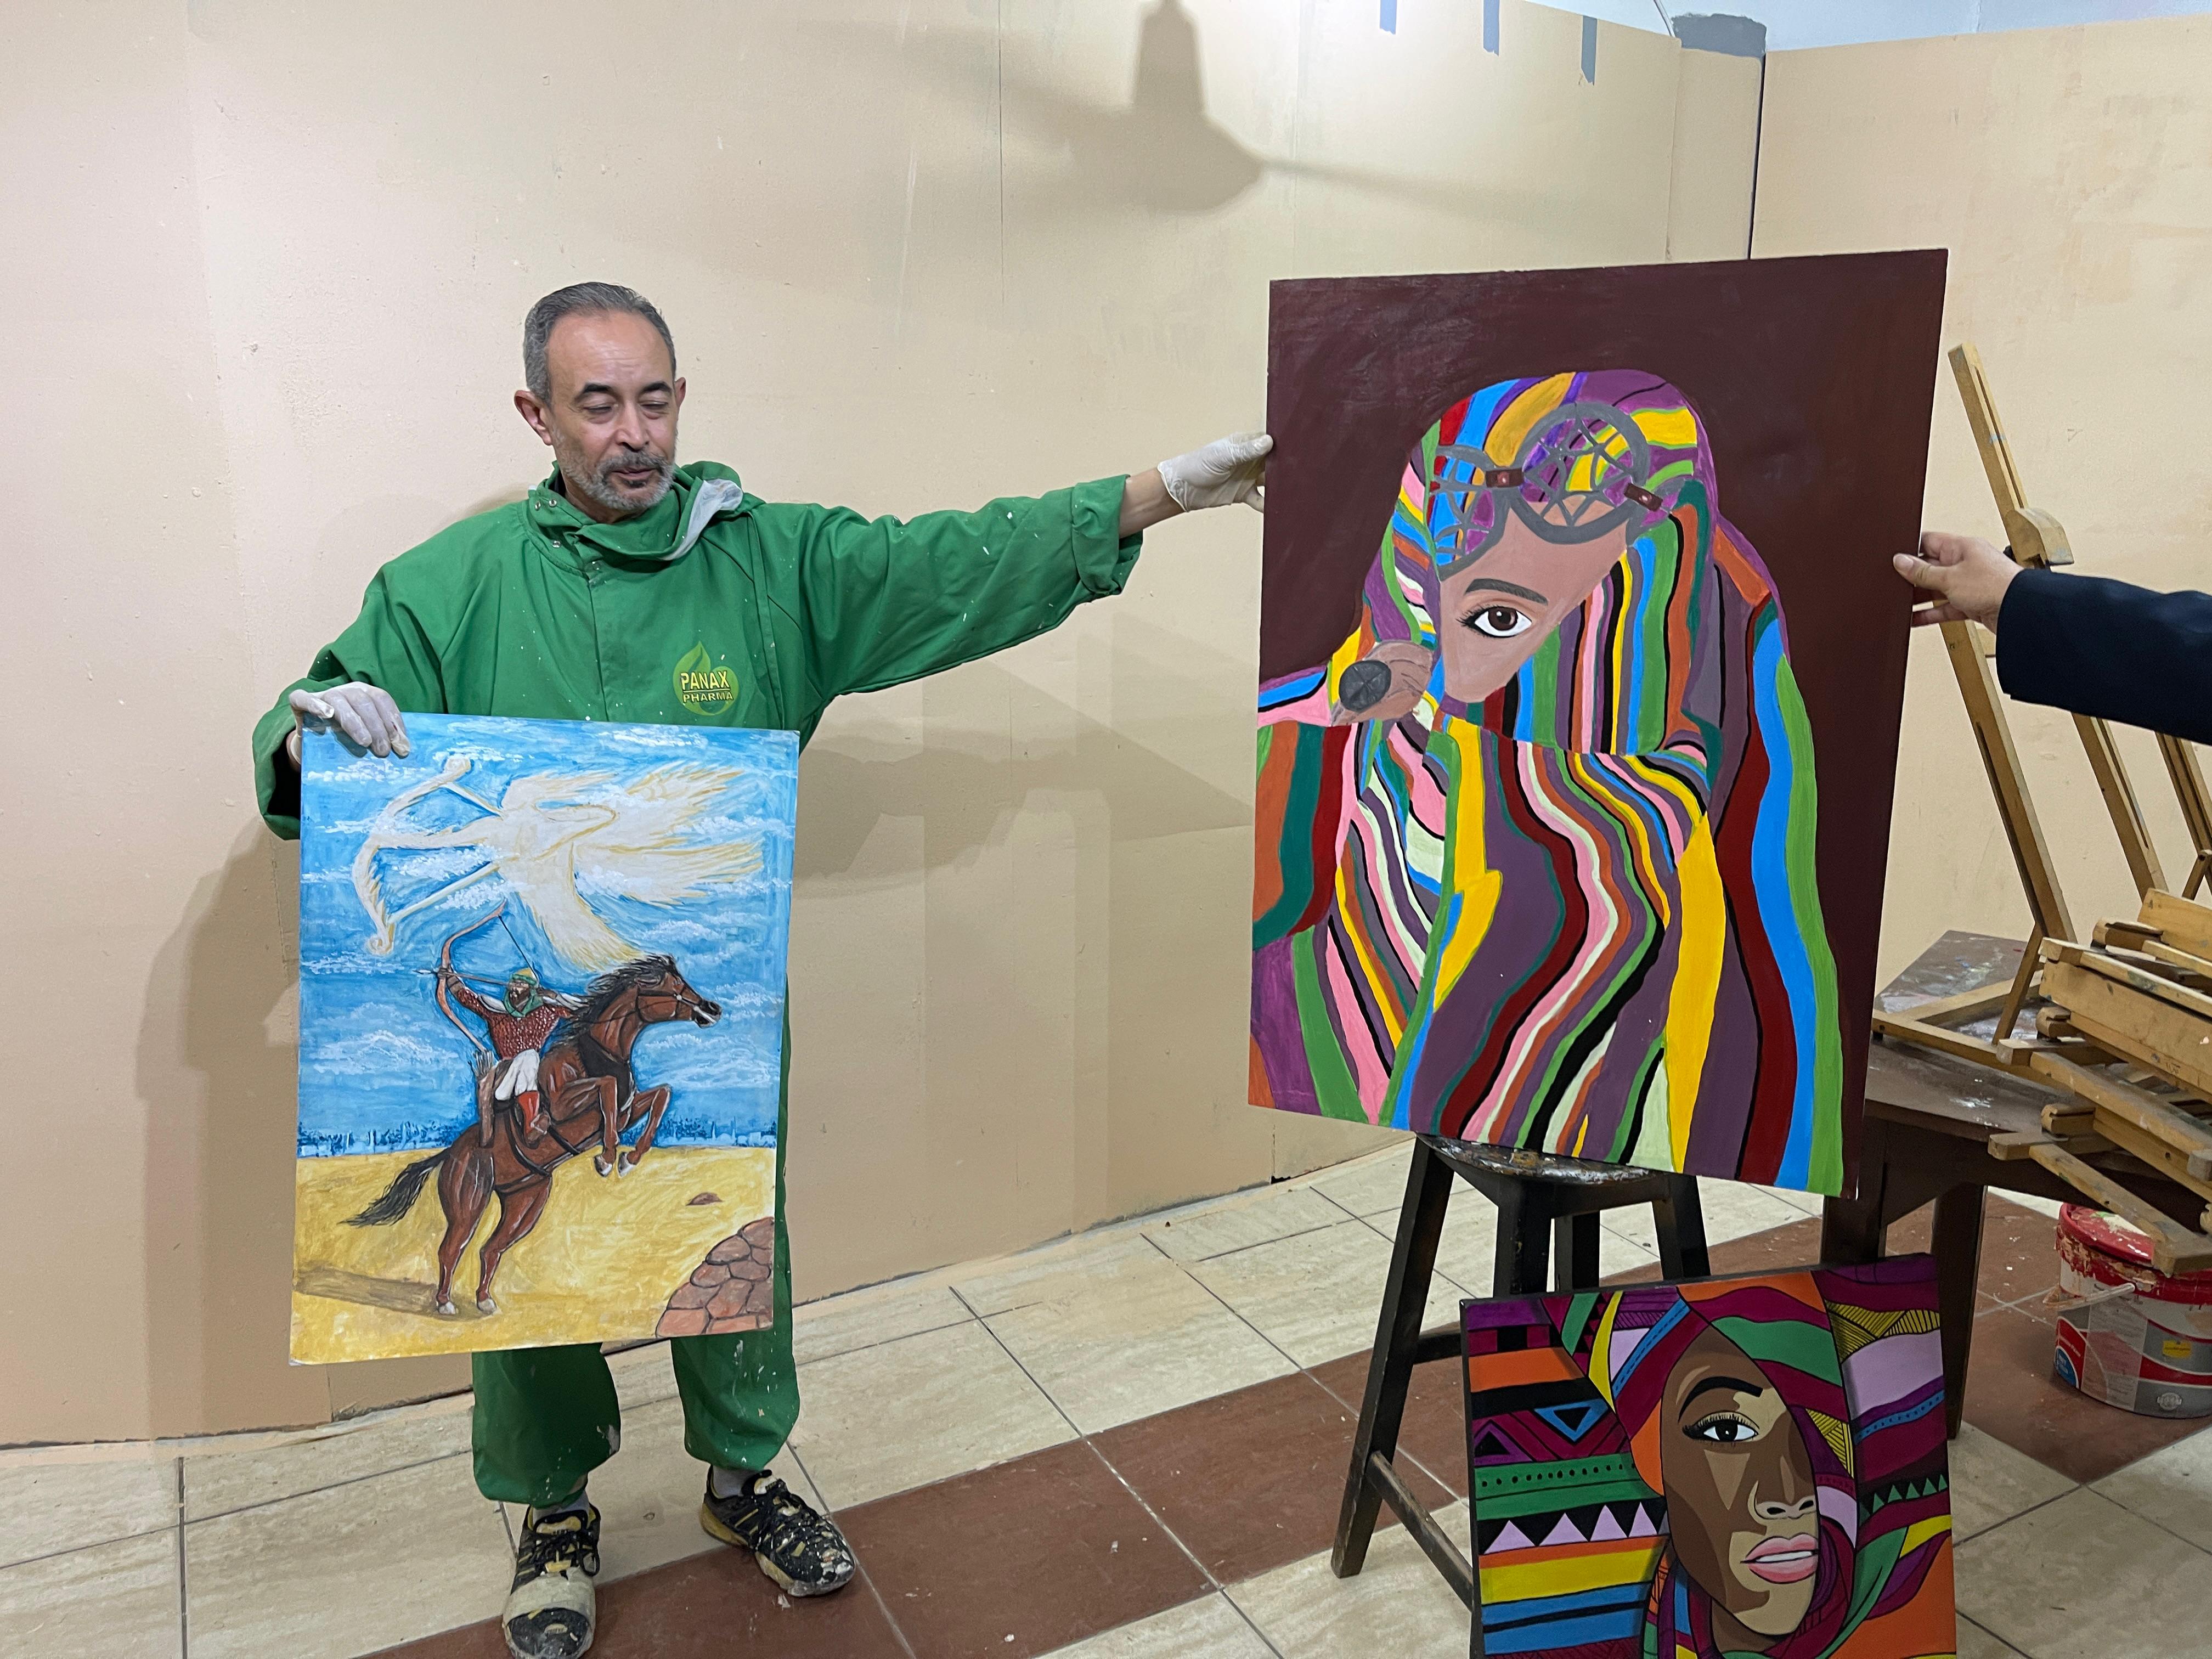 Thebes Academy completes the final preparations for the Thebes Annual Fine Arts Exhibition